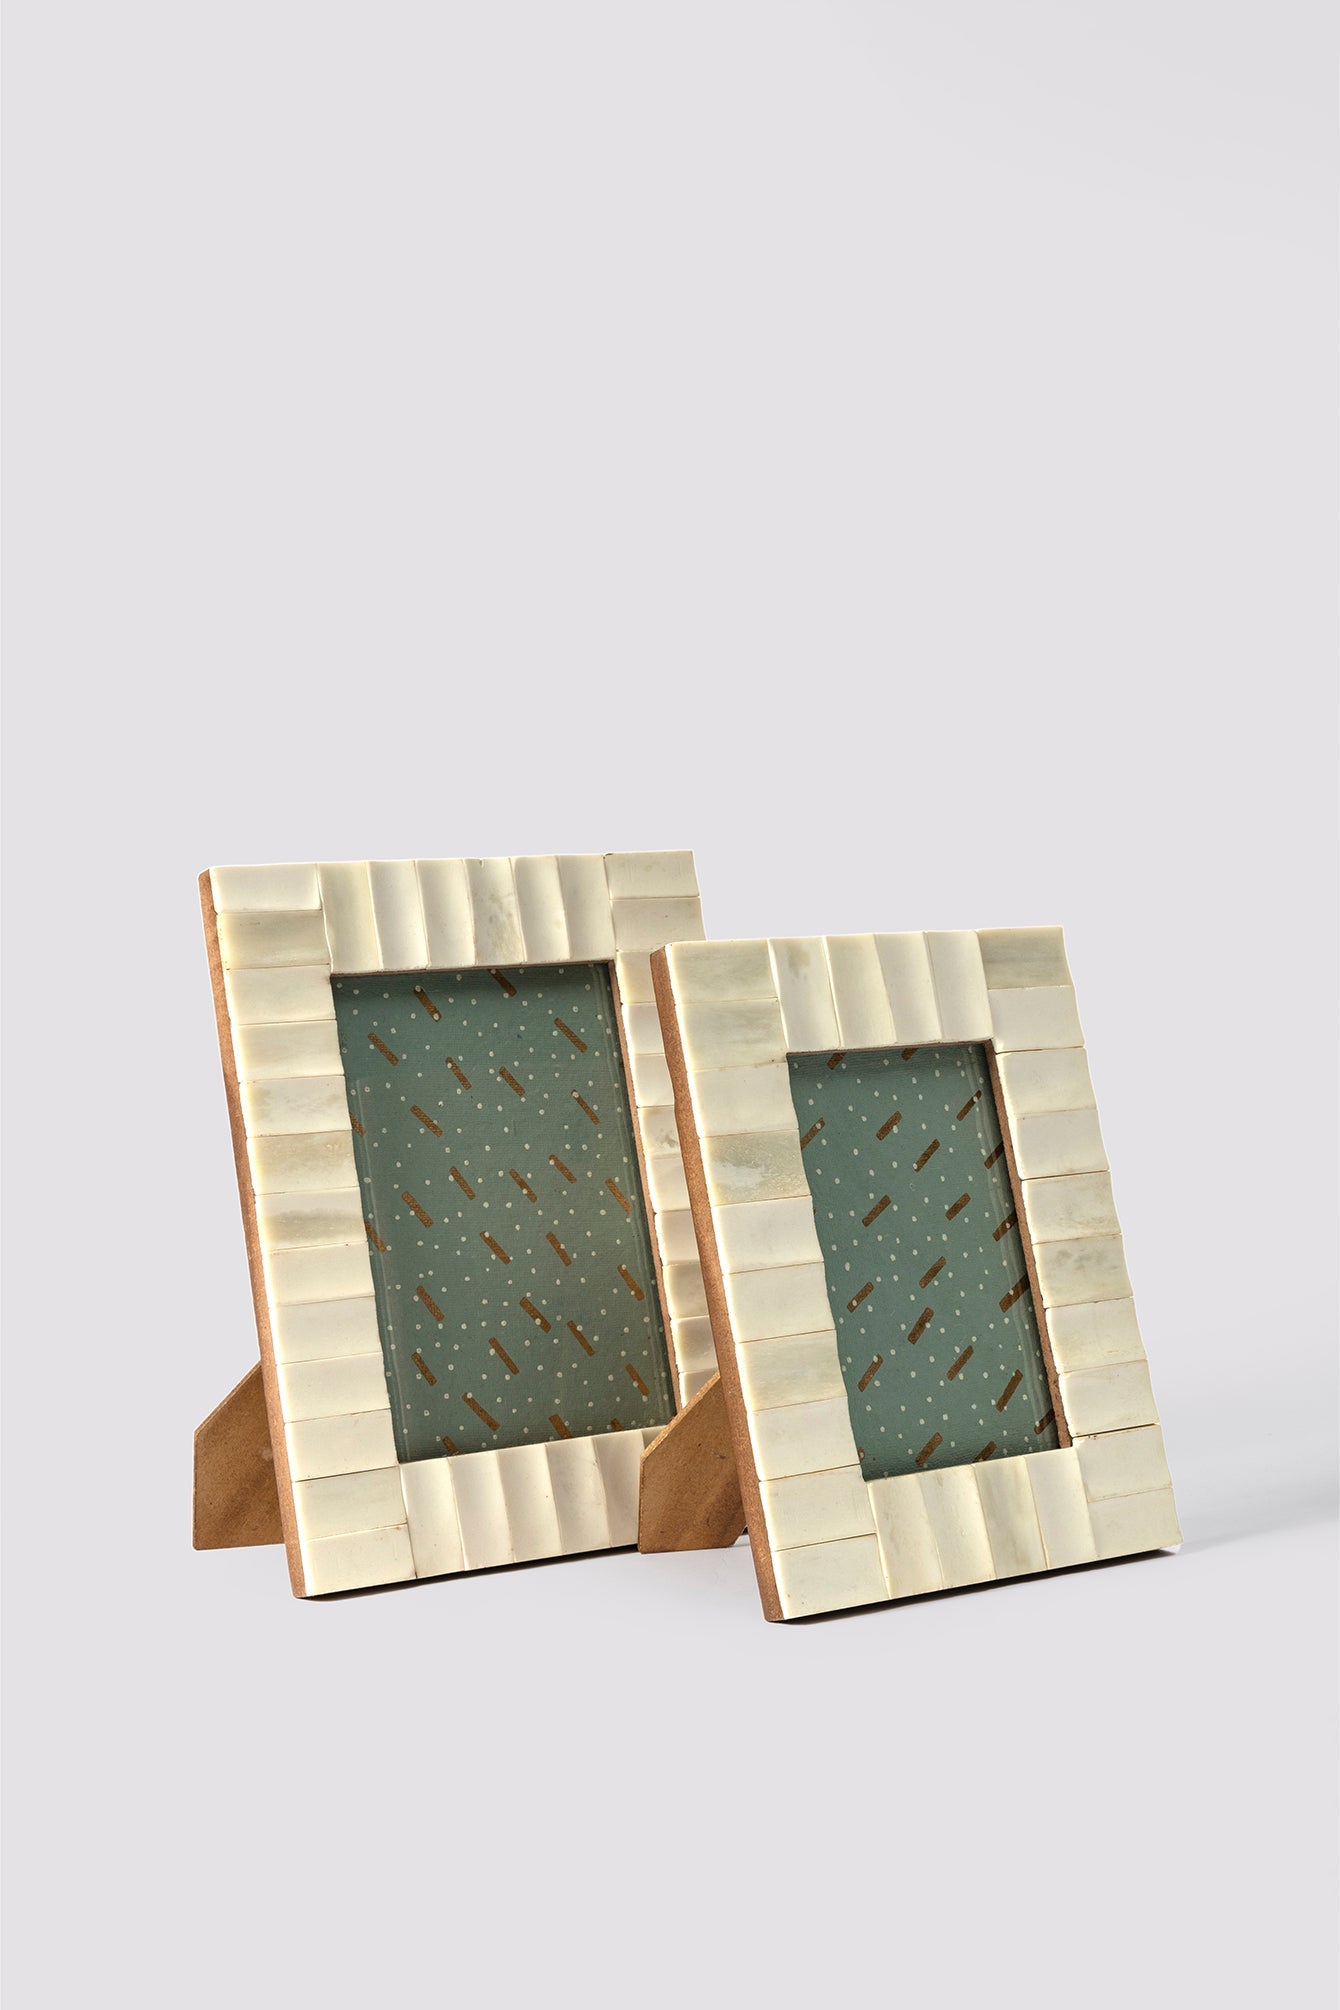 Vohma Wooden Bone Inlay Photo Frame With Glass (Set of Two)